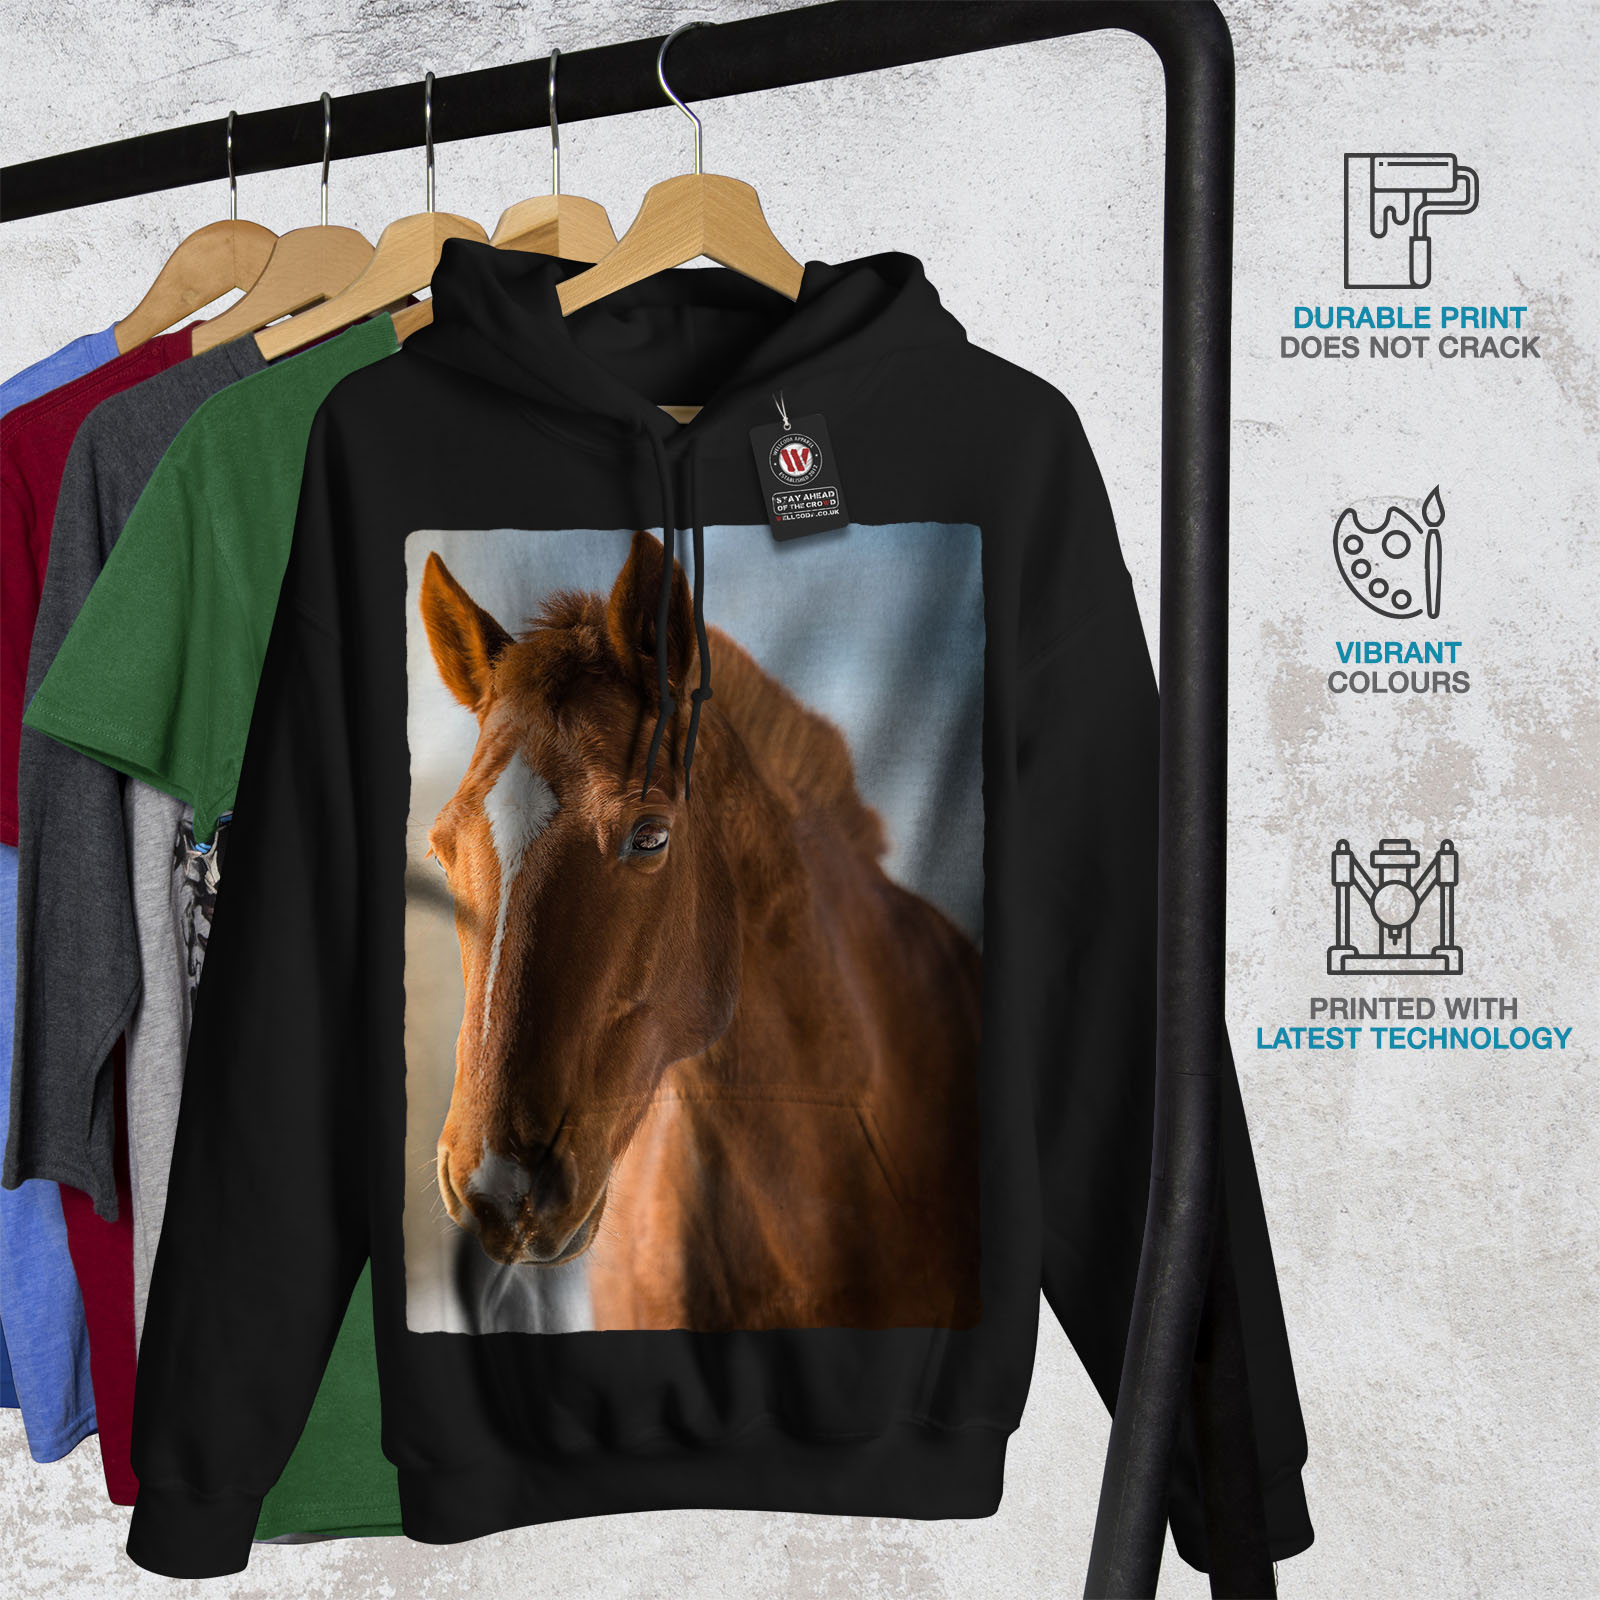 animaux Casual Pullover Pull Visible photo Animal Cheval Femme Sweat-shirt 